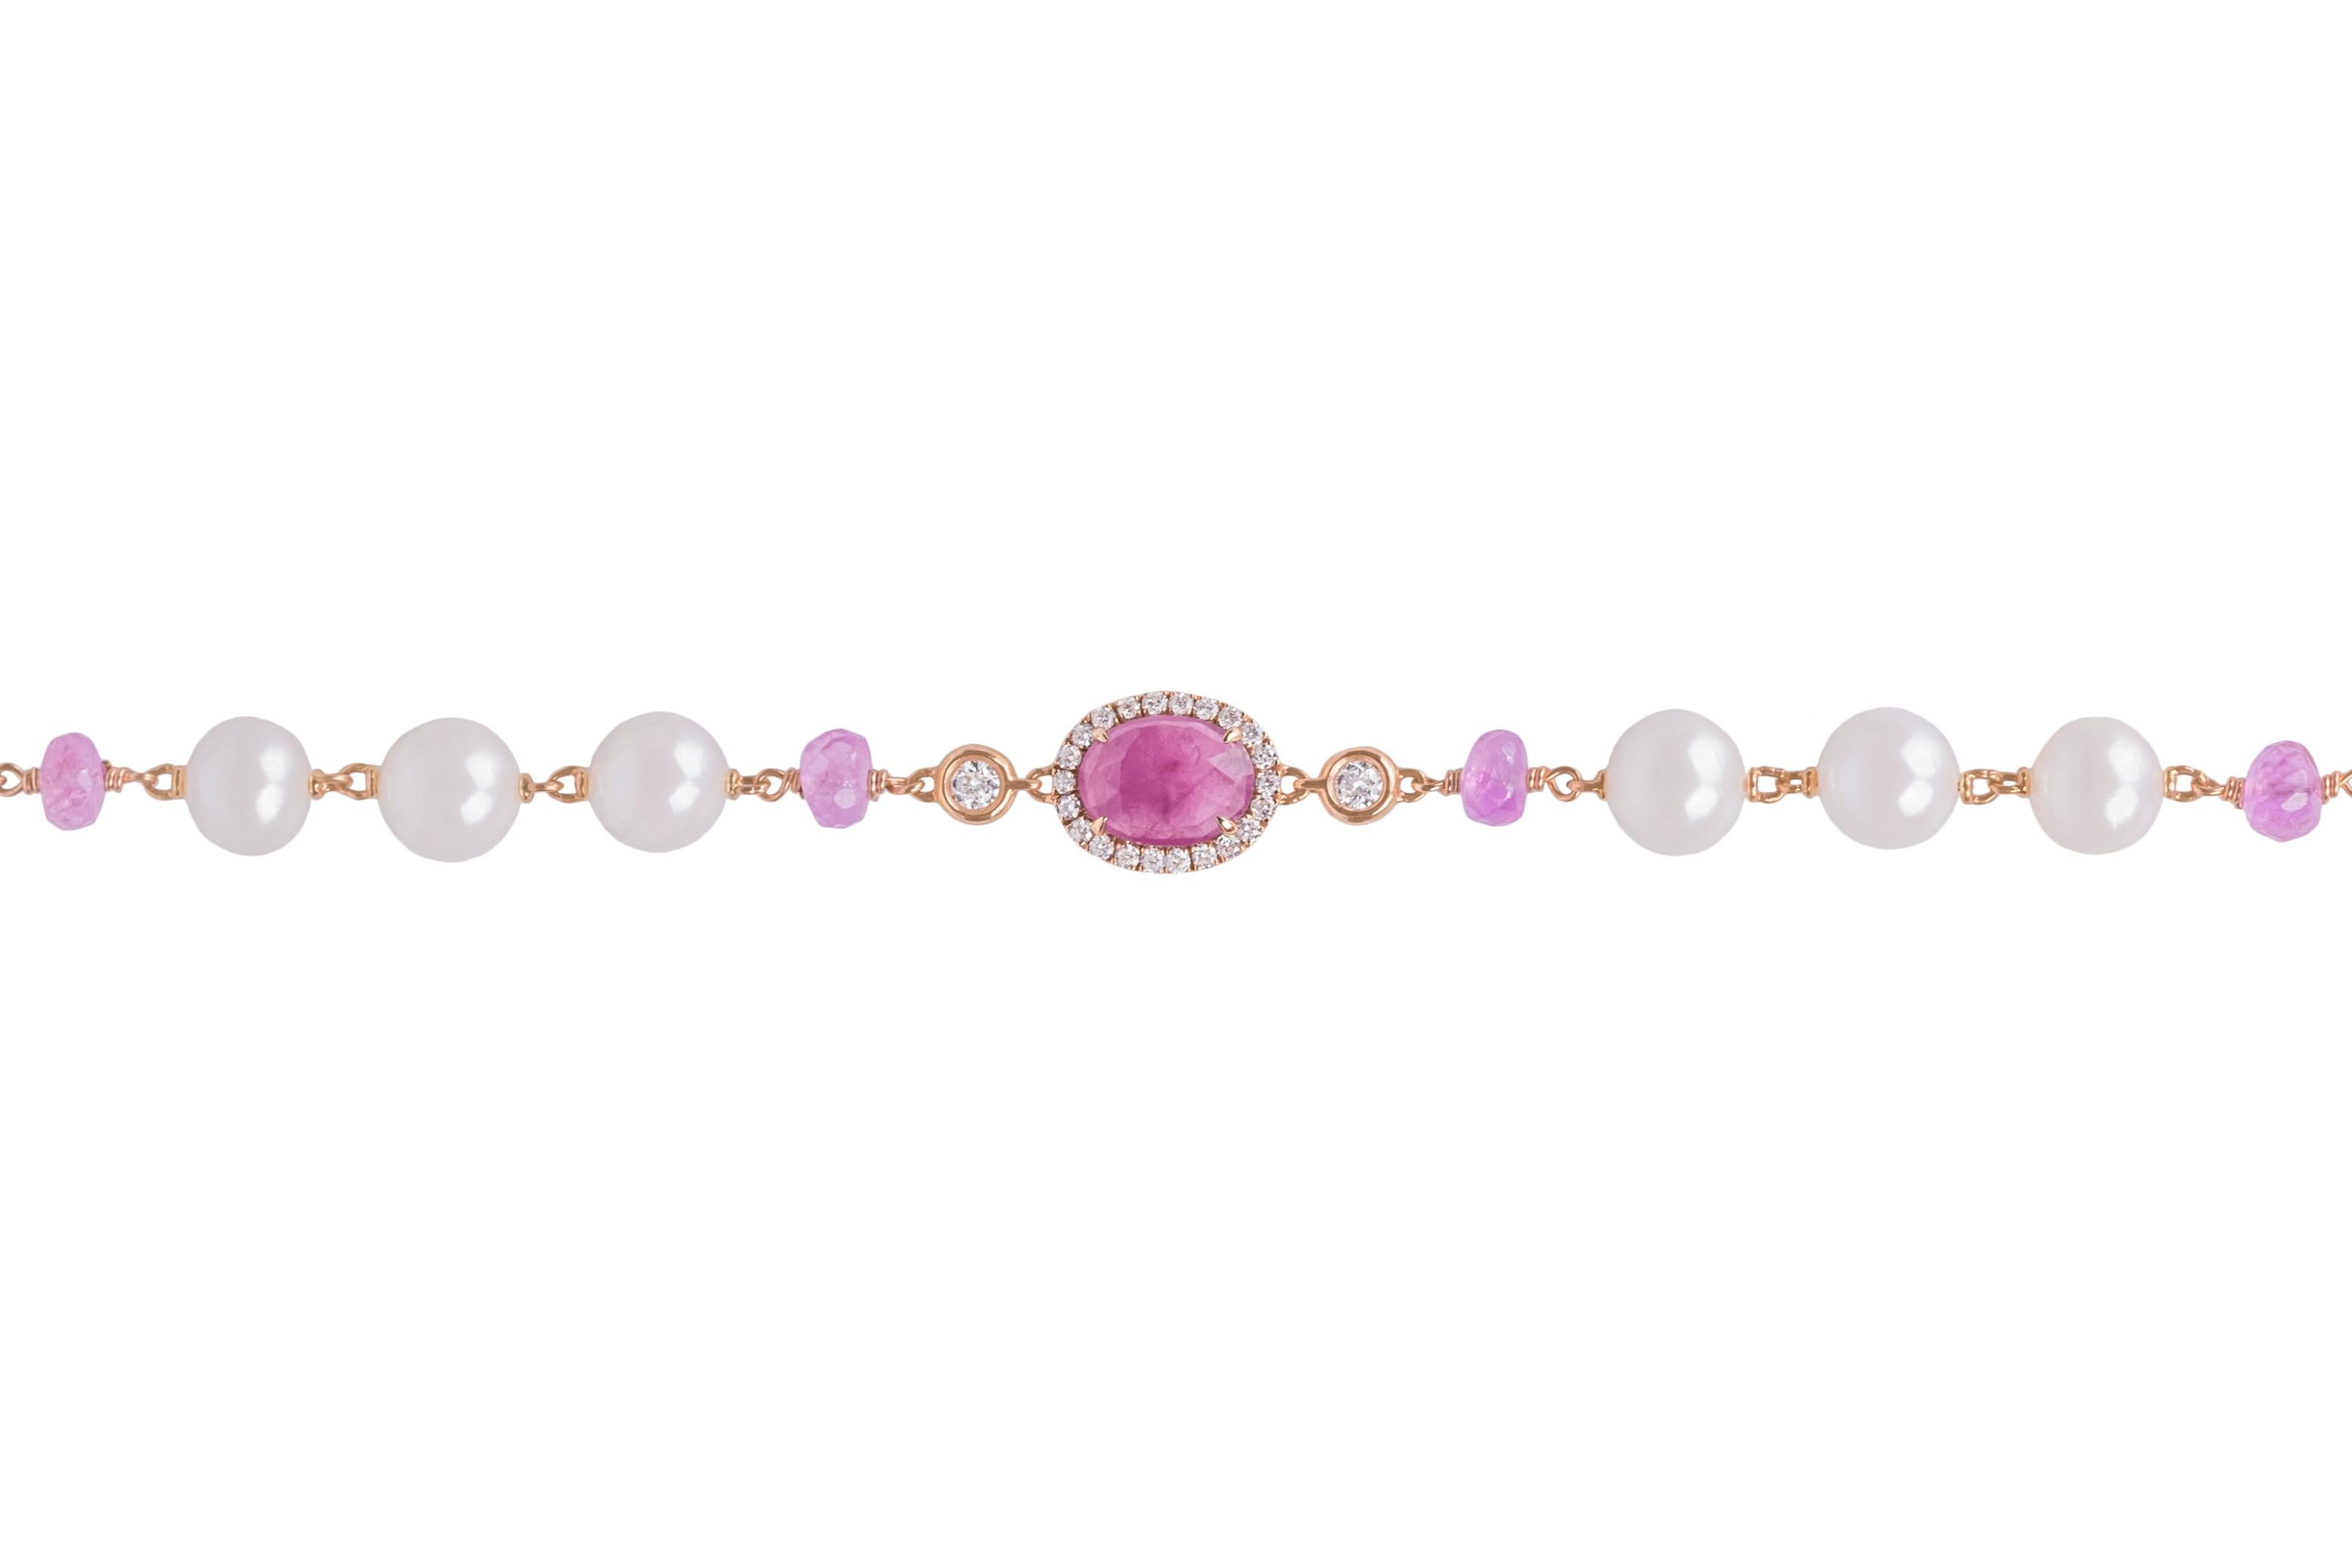 This lovely bracelet features an oval cut pink sapphire surrounded by brilliant cut diamonds, 3 pearls, 2 pink briolette cut sapphires and 2 brilliant-cut diamonds on each side. It is made in Italy by Crivelli.
This bracelet has a lobster claw and